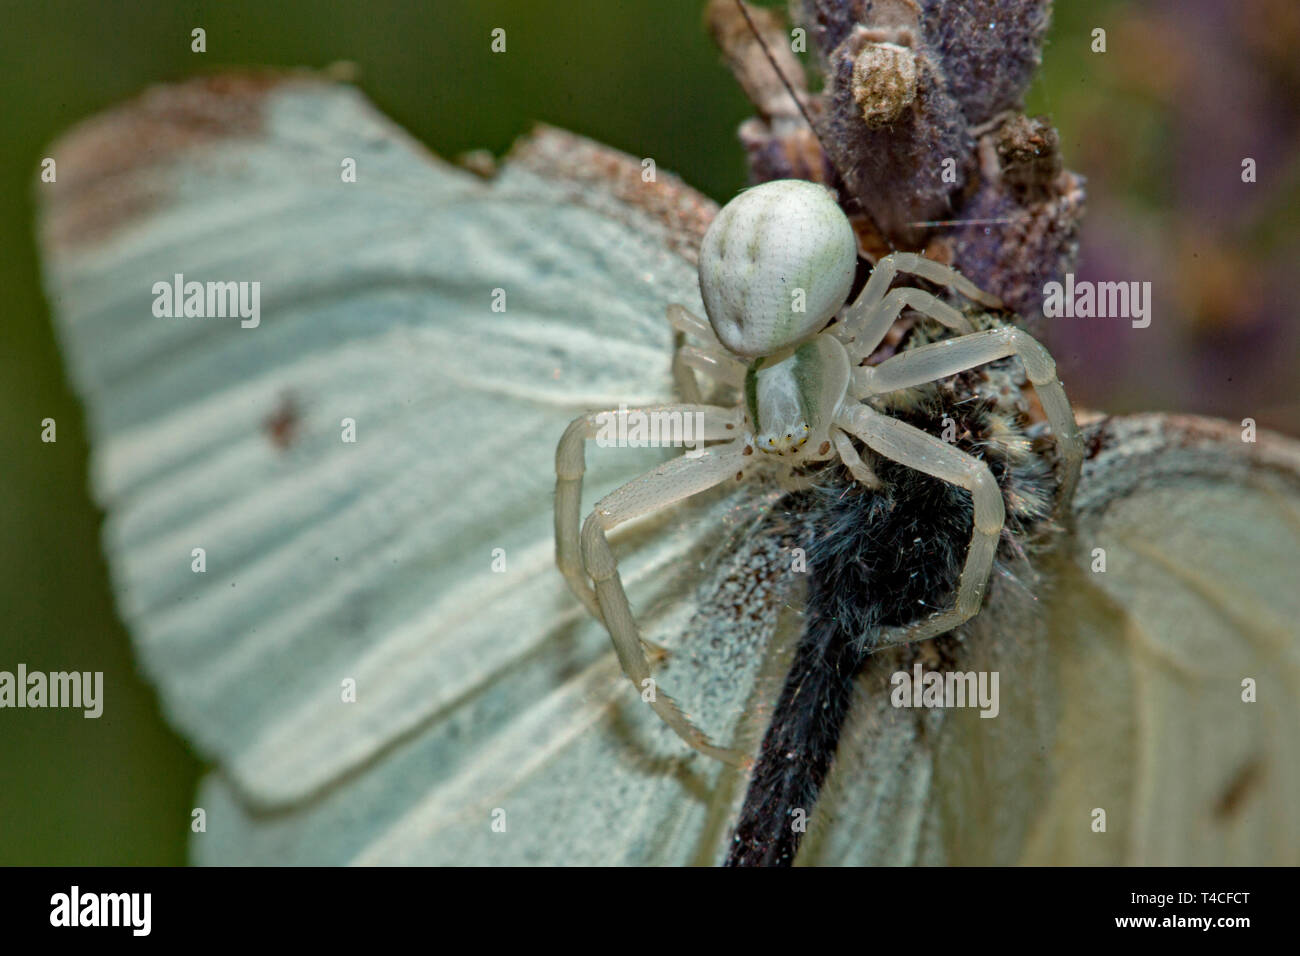 goldenrod crab spider with seized butterfly, (Misumena vatia) Stock Photo